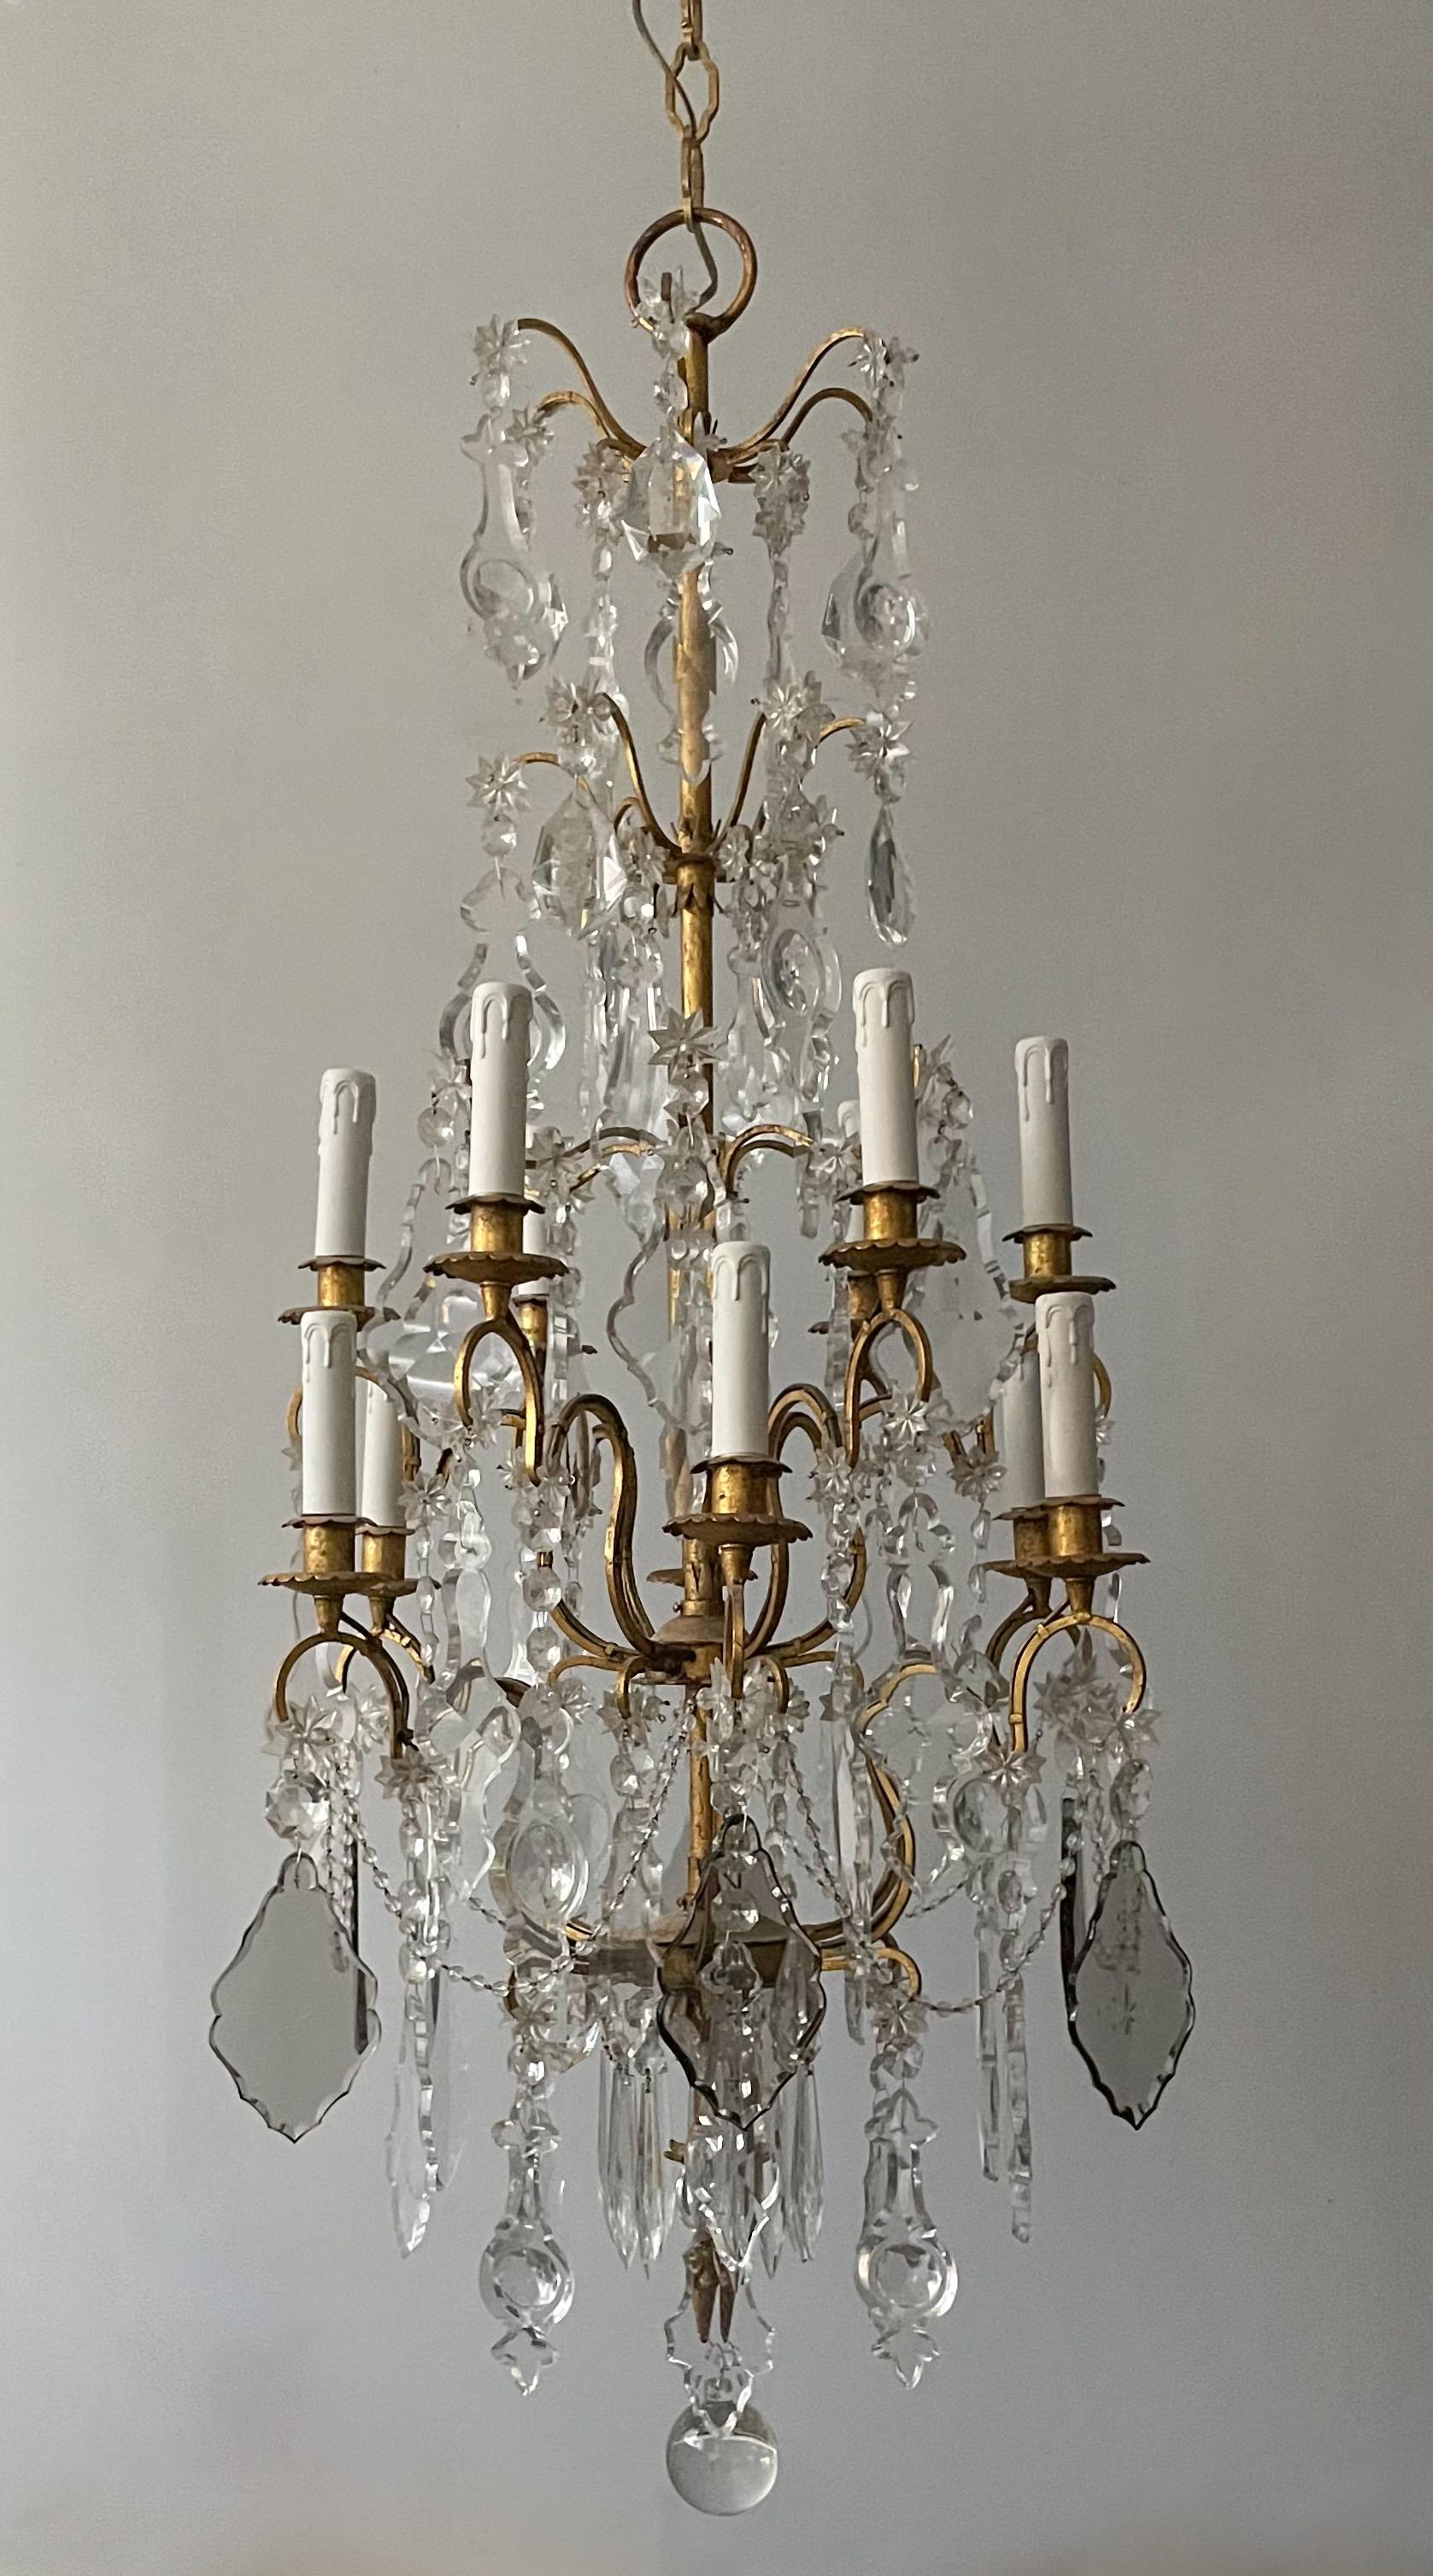 Gorgeous, Italian 1940s gilt-iron and crystal chandelier in the neoclassical style.

The chandelier consists of a two tier gilded iron frame decorated with a rich abundance of shapely French pendants. 

The chandelier is wired and in working